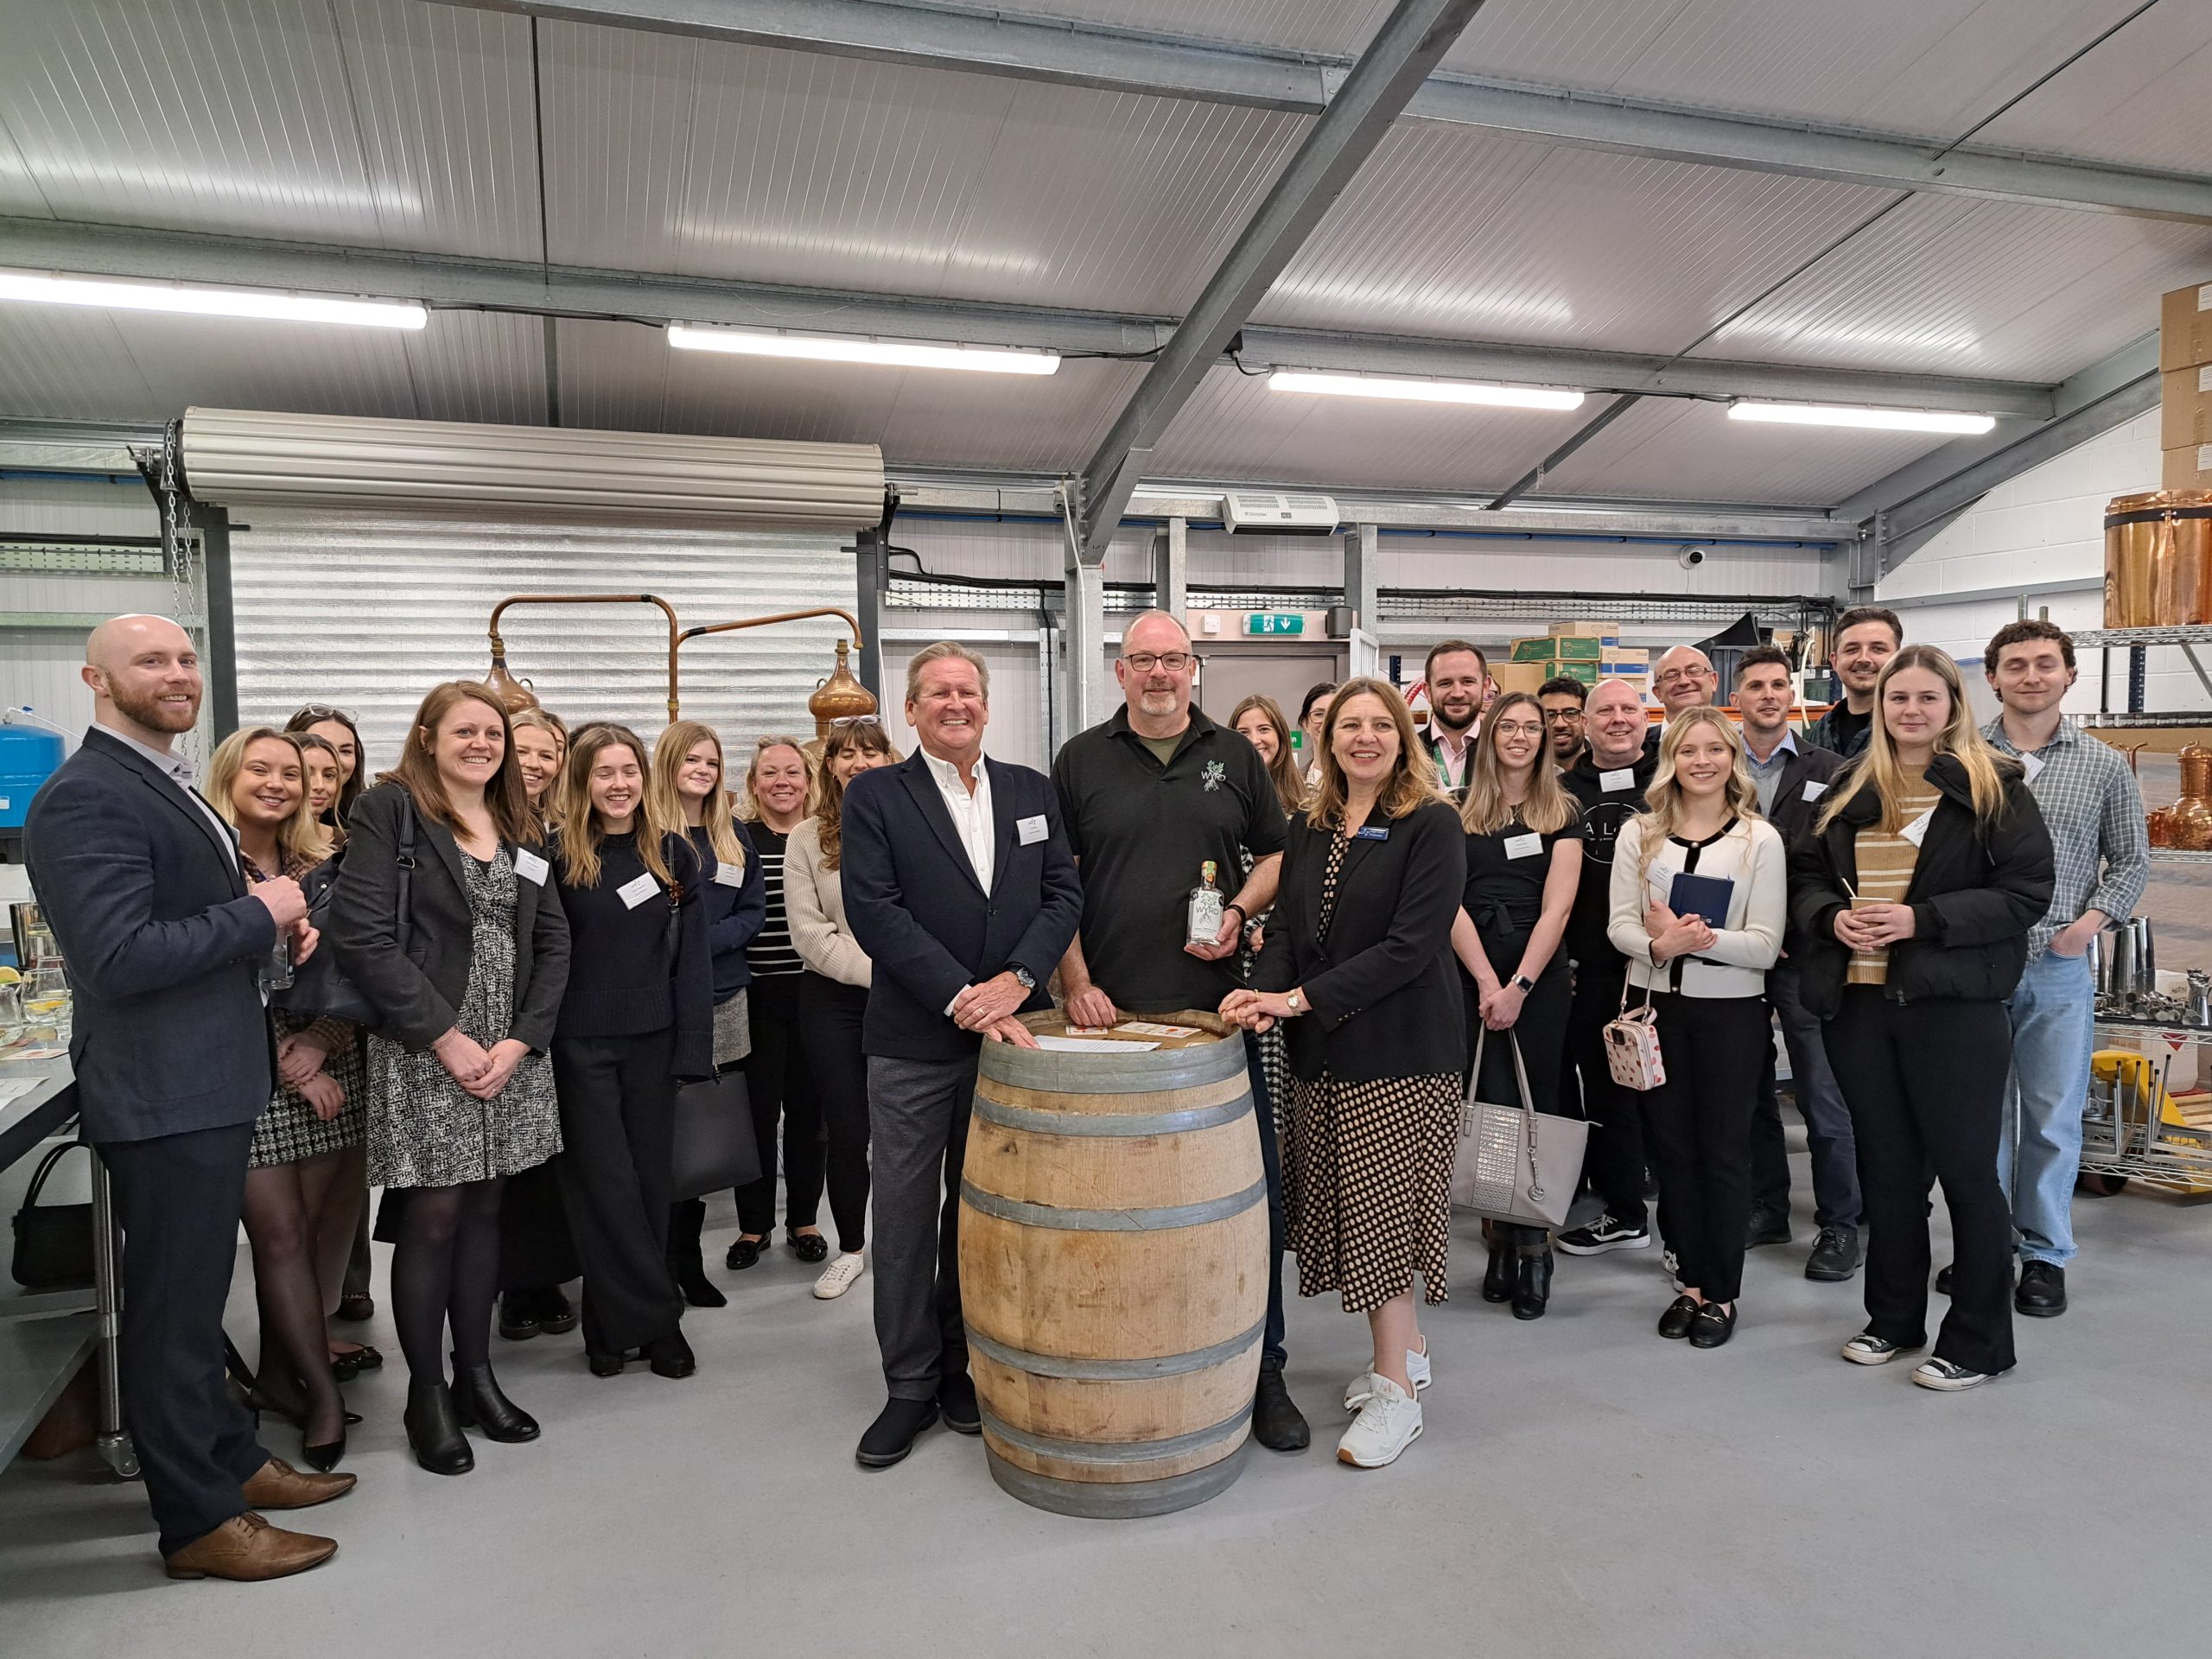 A masterclass in networking in a distillery – the perfect blend